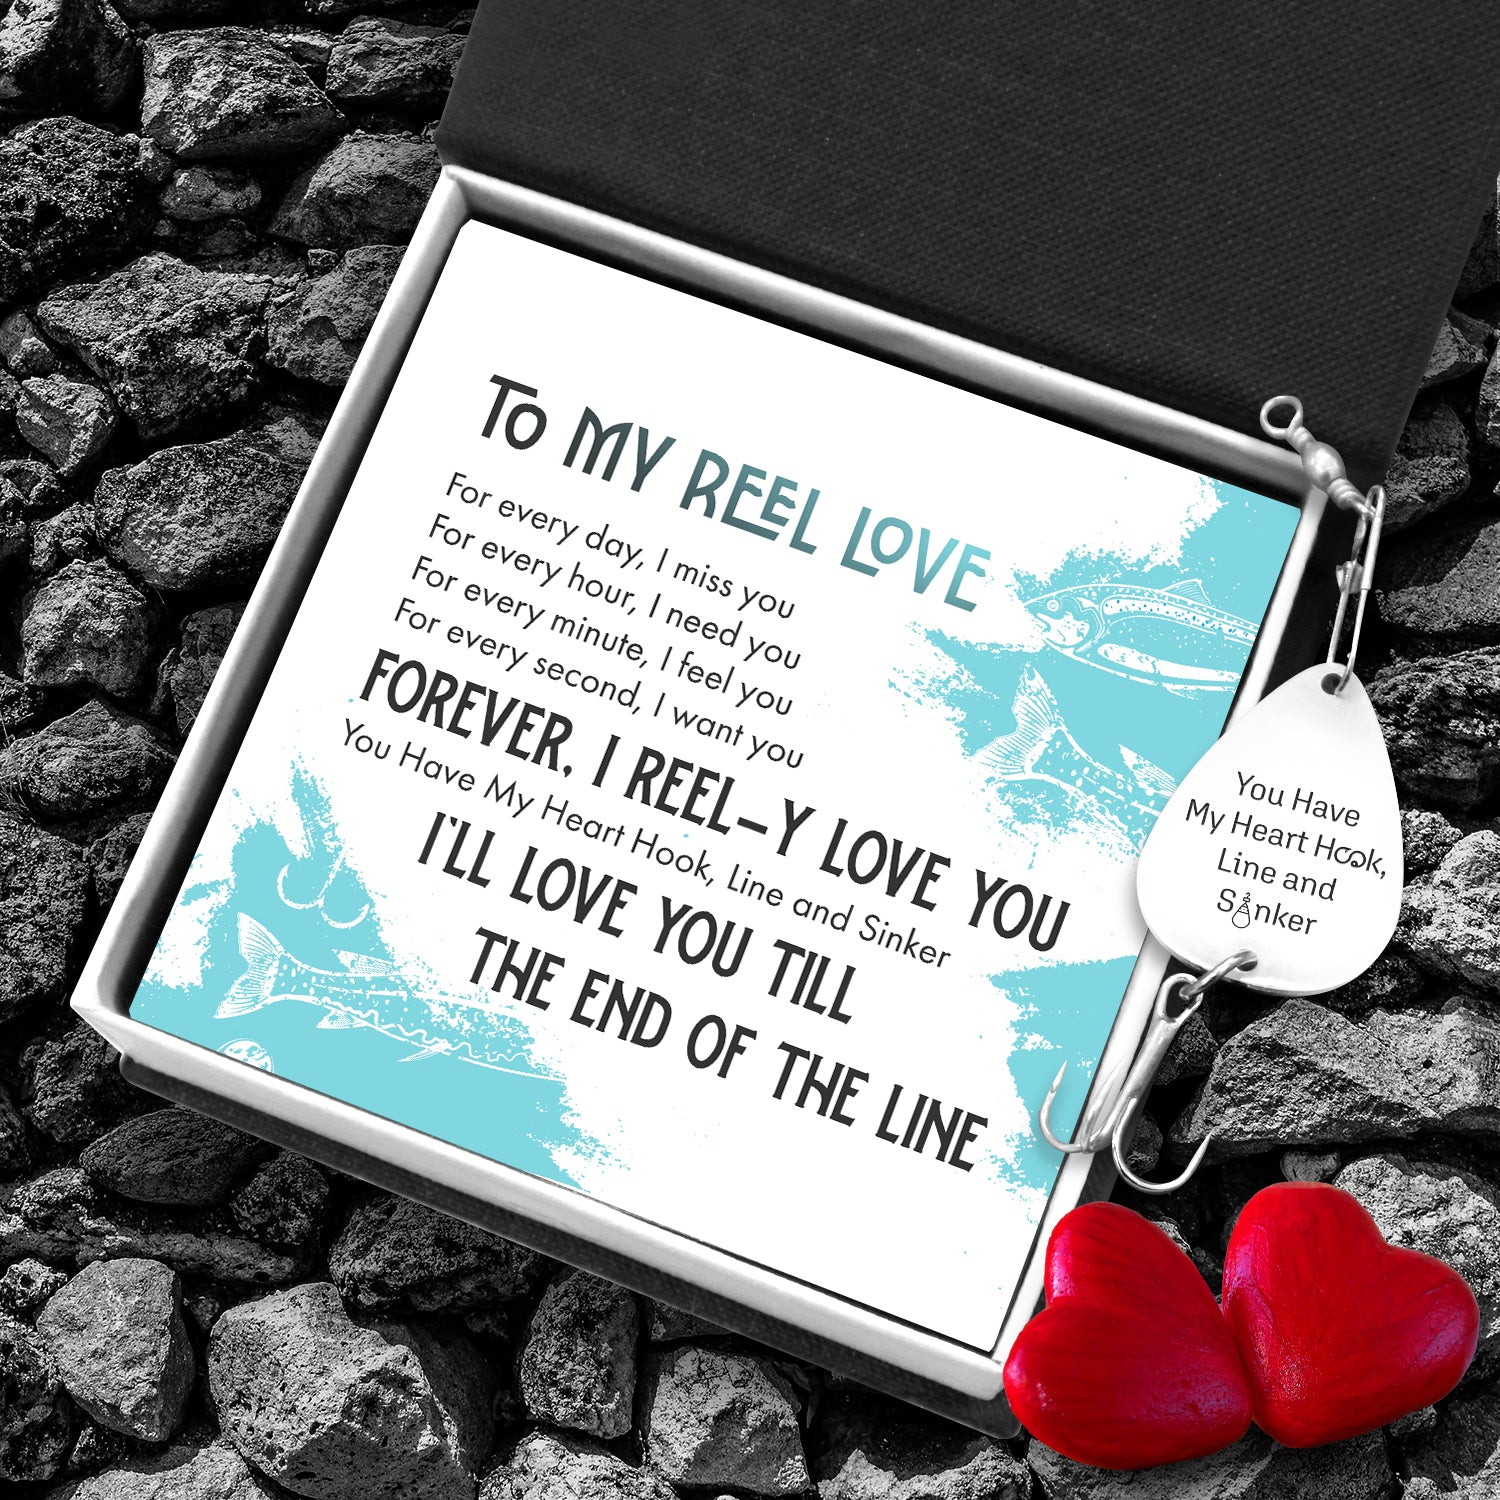 Engraved Fishing Hook - To My Reel Love - Forever, I Reel-y Love You - Ukgfa13006